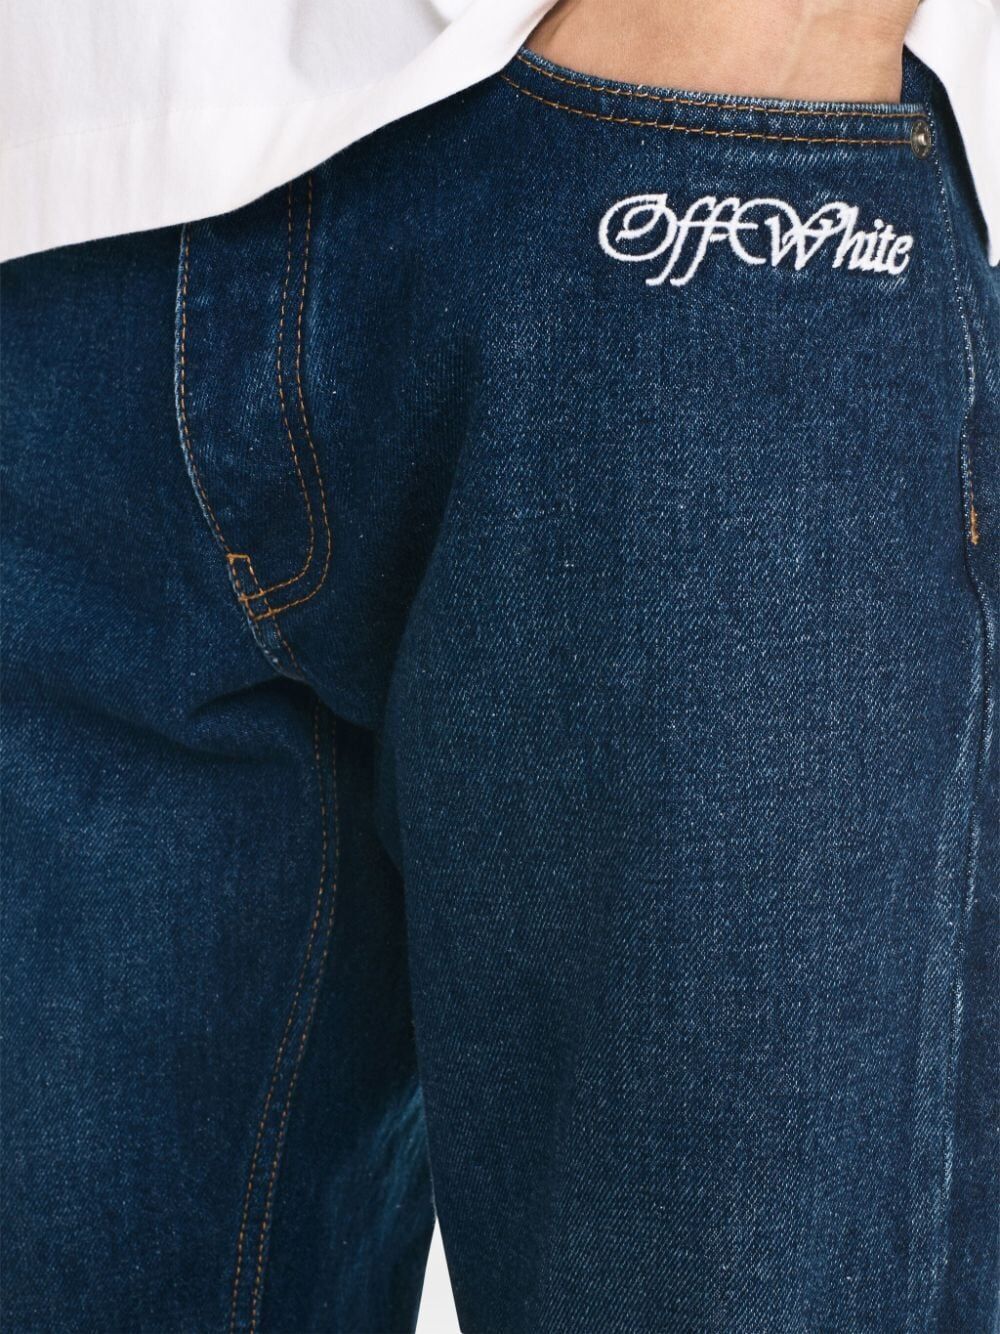 OFF-WHITE SCRIPT TAPERED Jeans